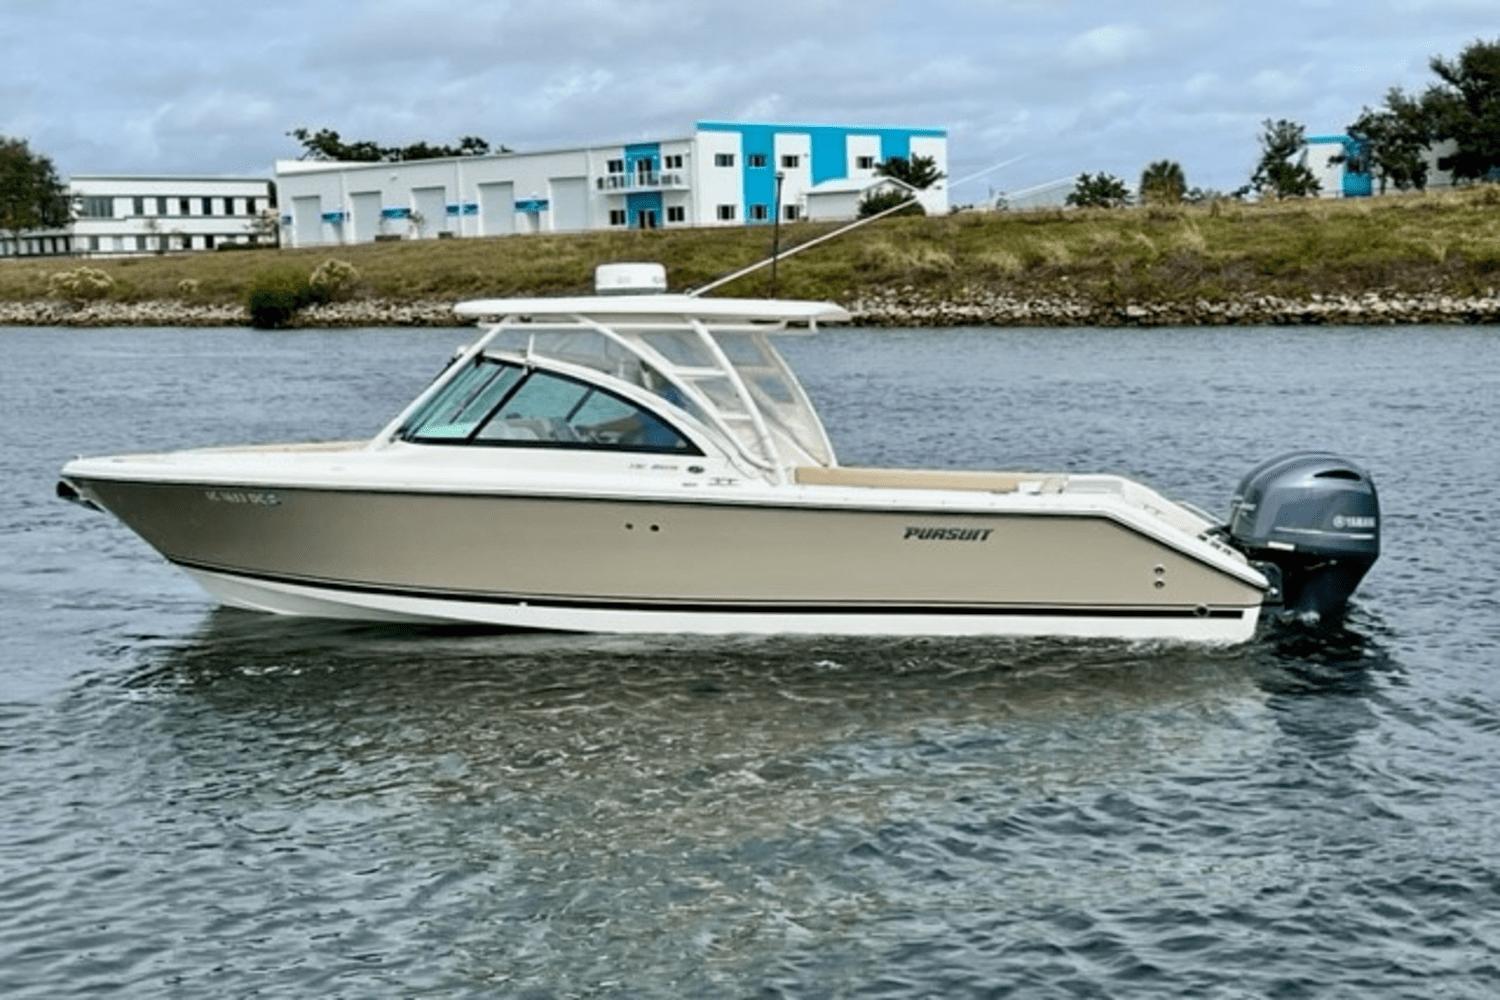 Page 3 of 250 - Saltwater fishing power boats for sale - boats.com